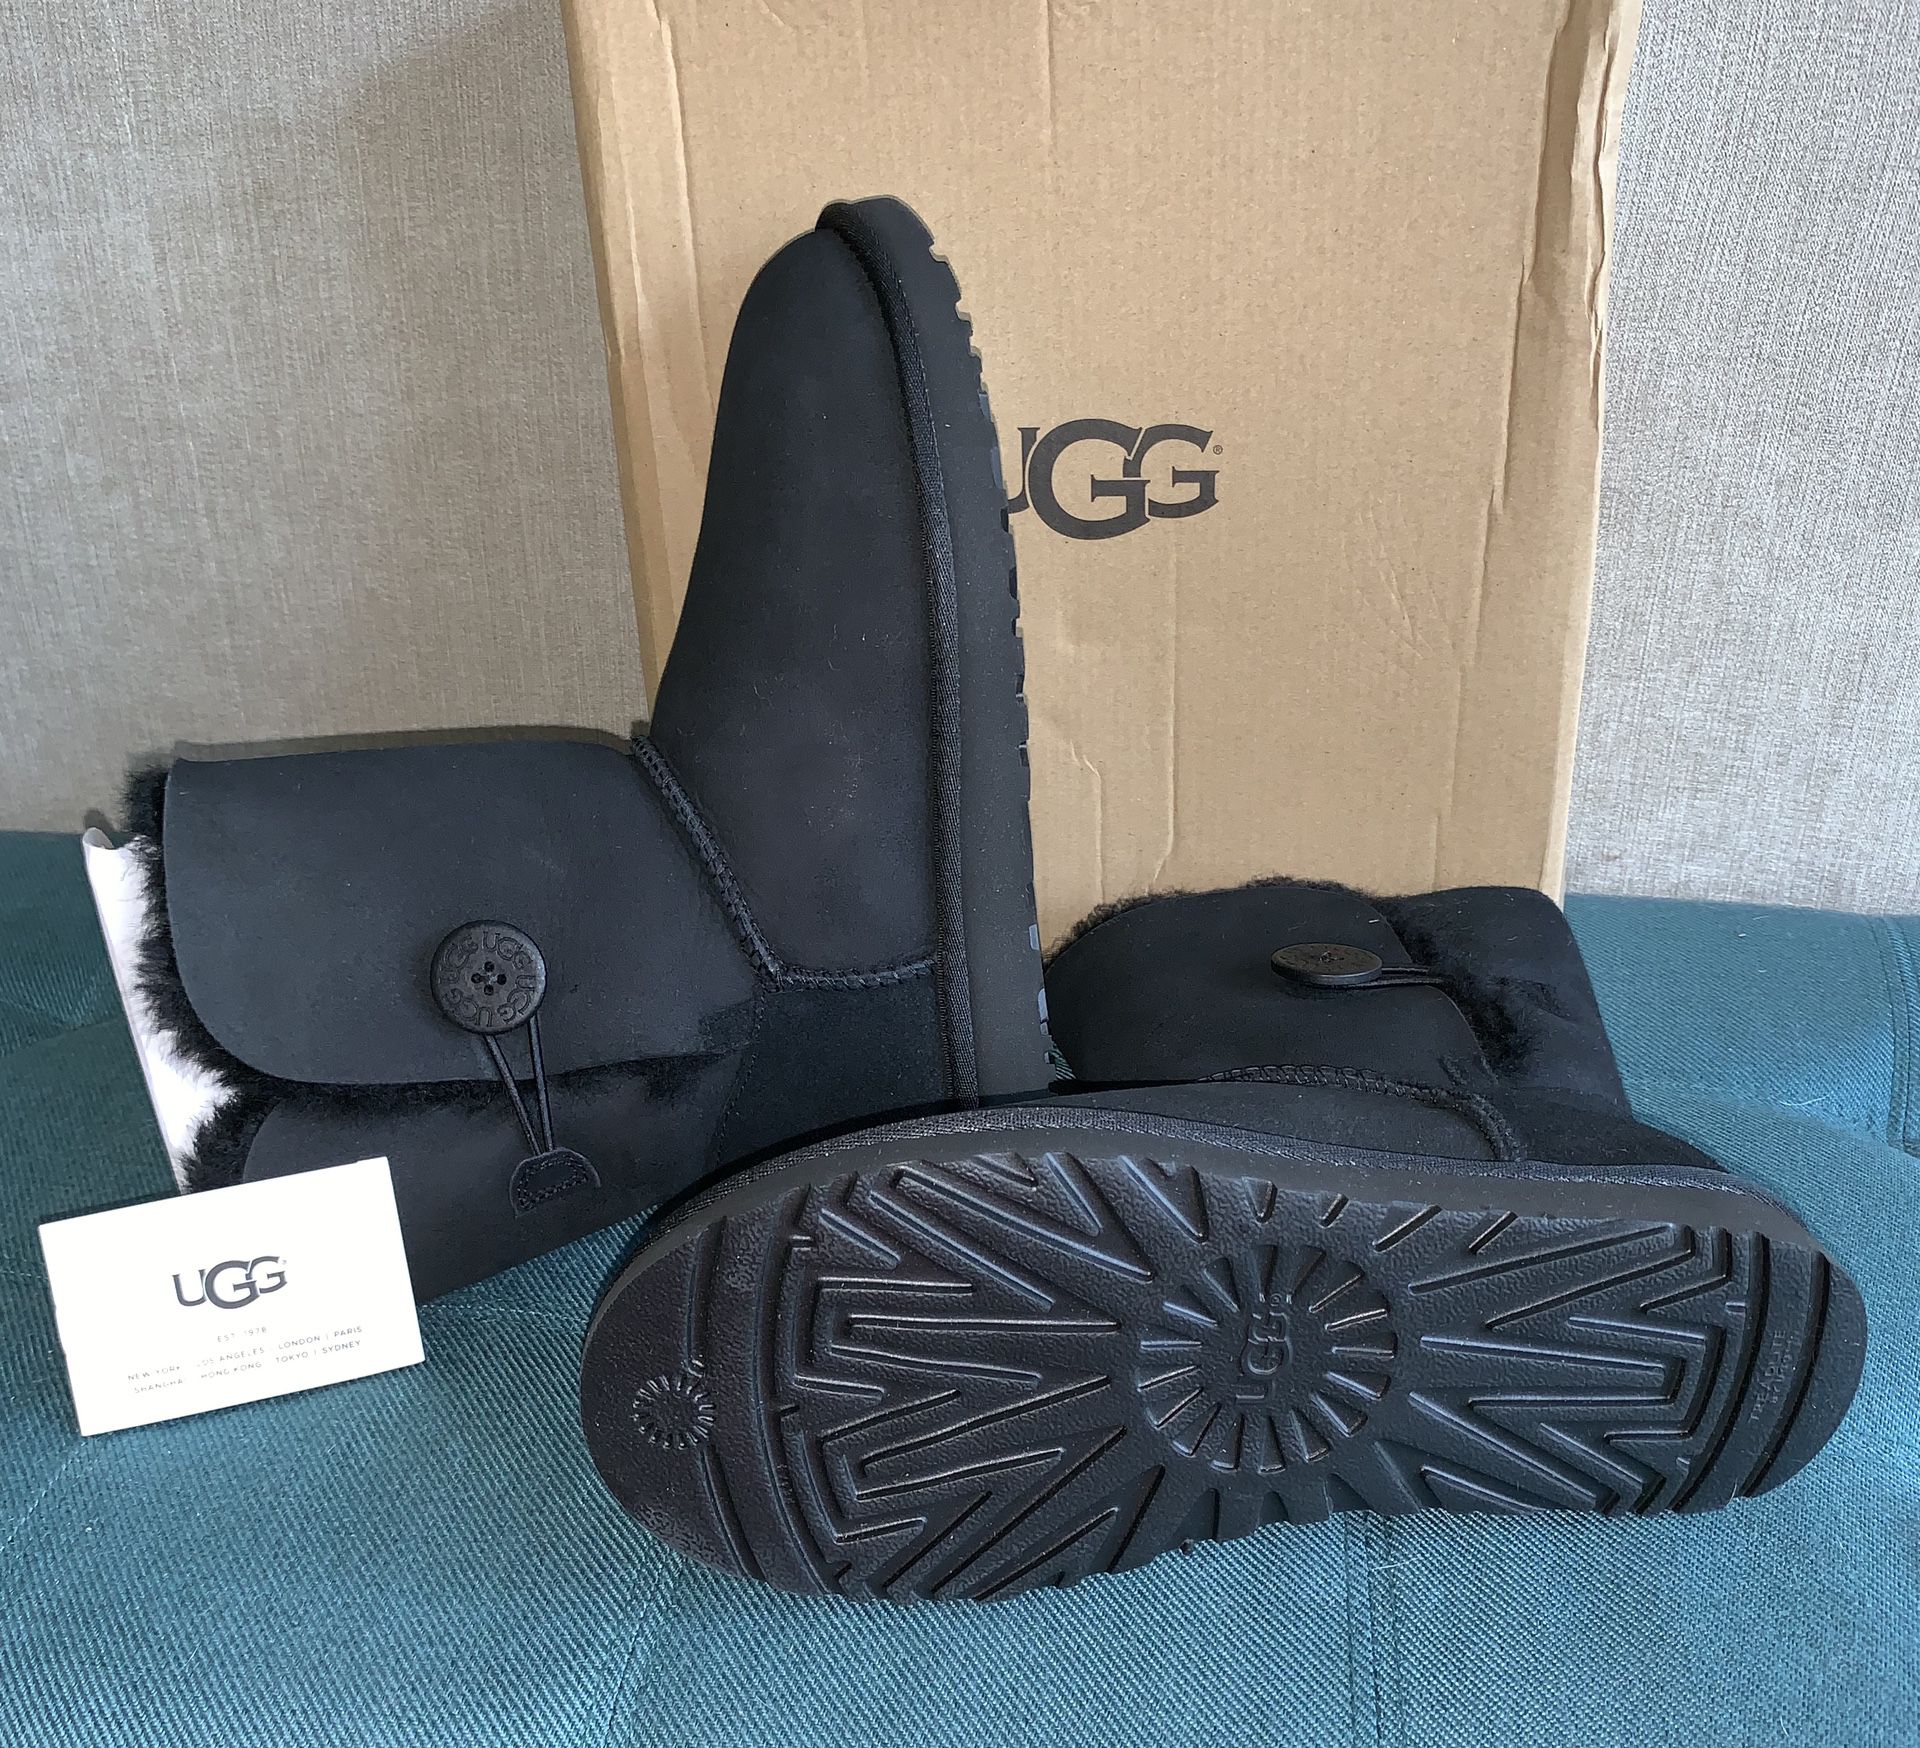 Brand New Ugg’s Bailey Button II Size 8